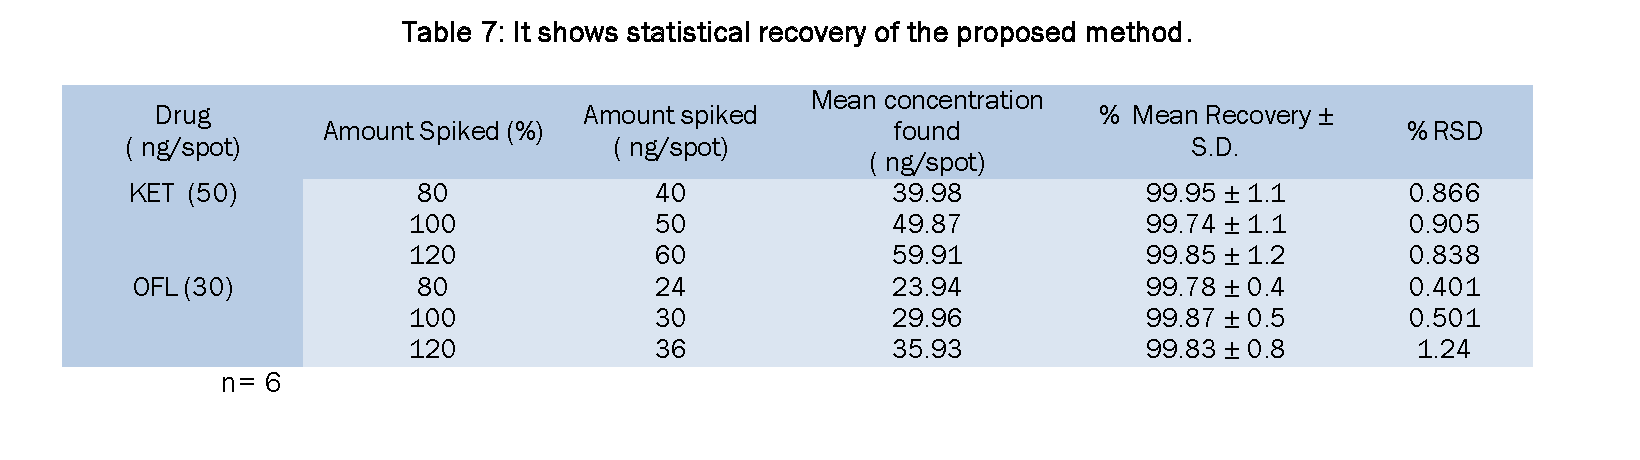 Pharmaceutical-Analysis-It-shows-statistical-recovery-proposed-method